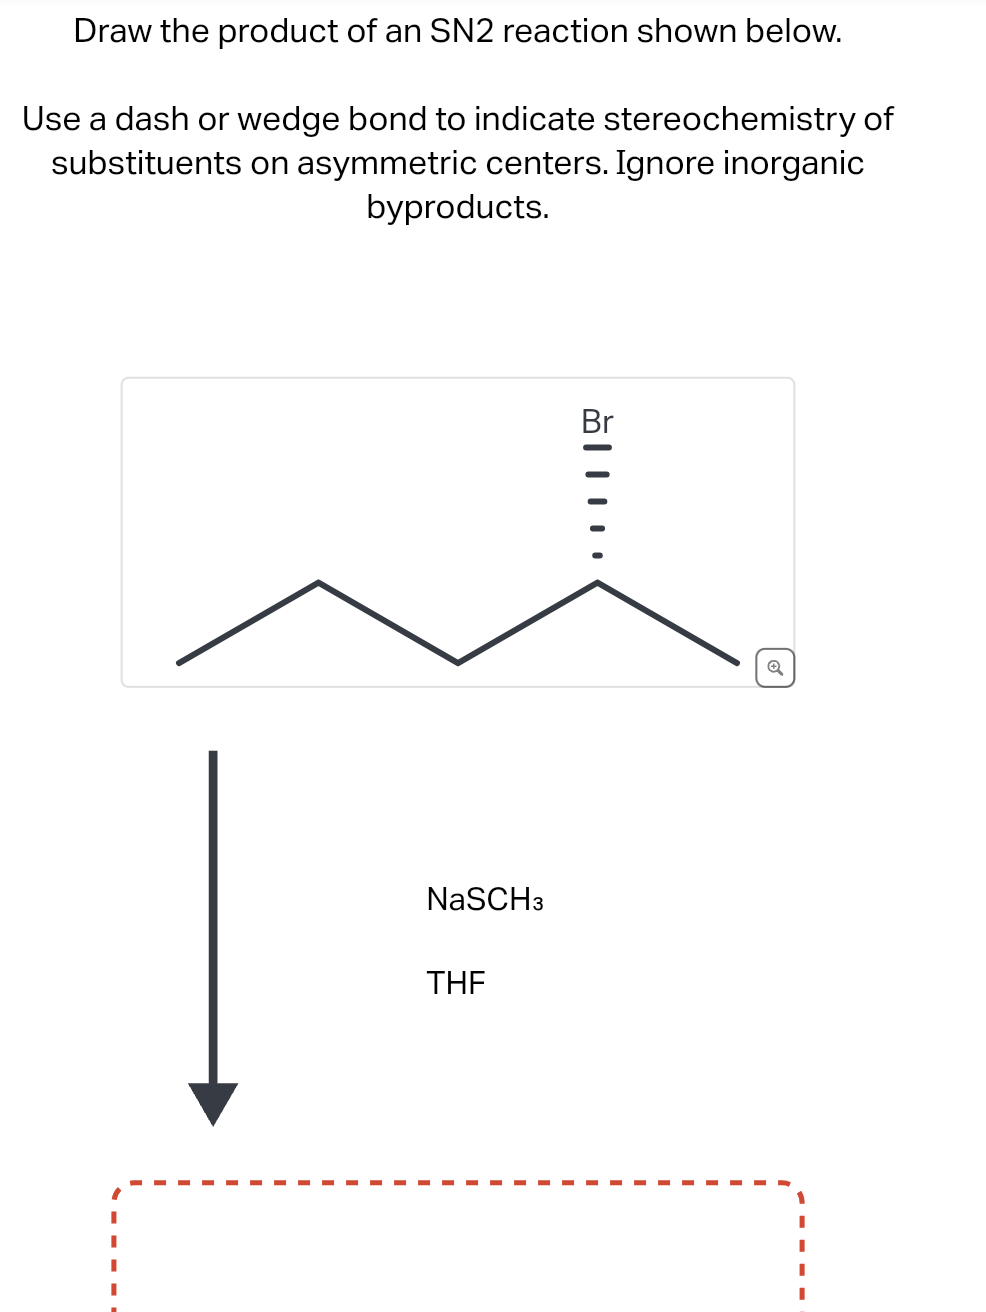 Draw the product of an SN2 reaction shown below.
Use a dash or wedge bond to indicate stereochemistry of
substituents on asymmetric centers. Ignore inorganic
byproducts.
NaSCH3
THF
Q